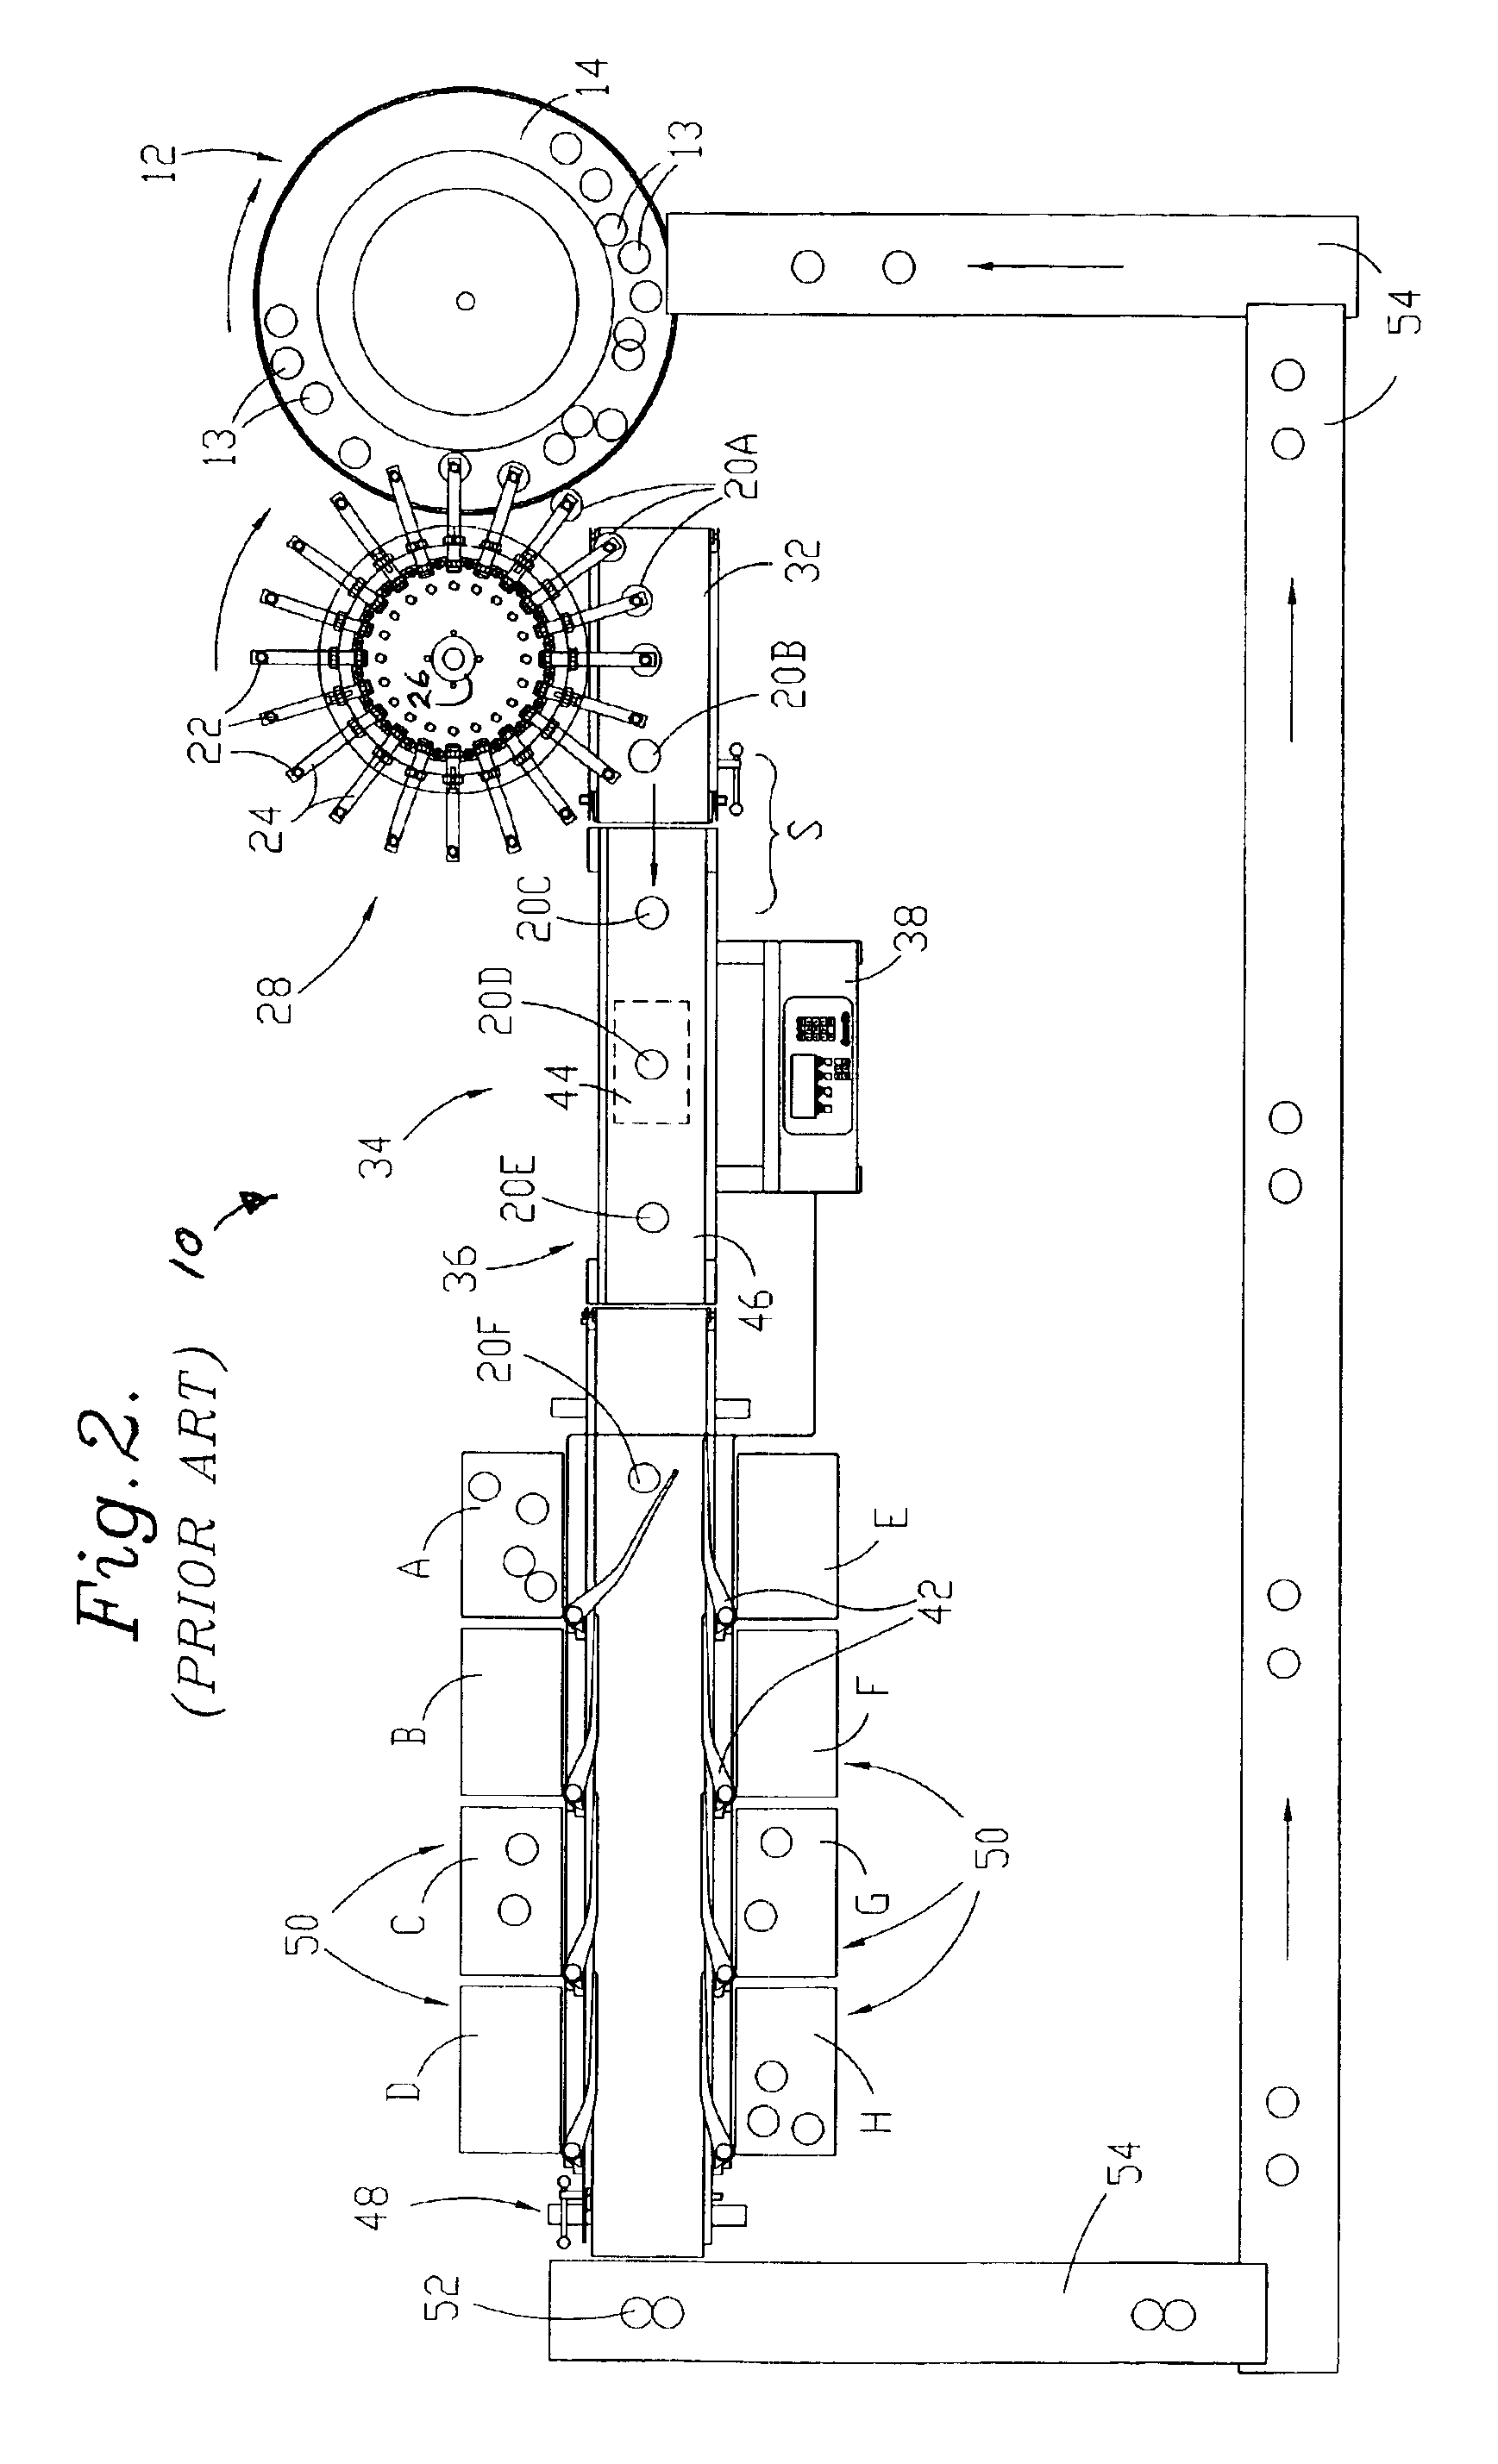 Method and apparatus for product attribute measurement